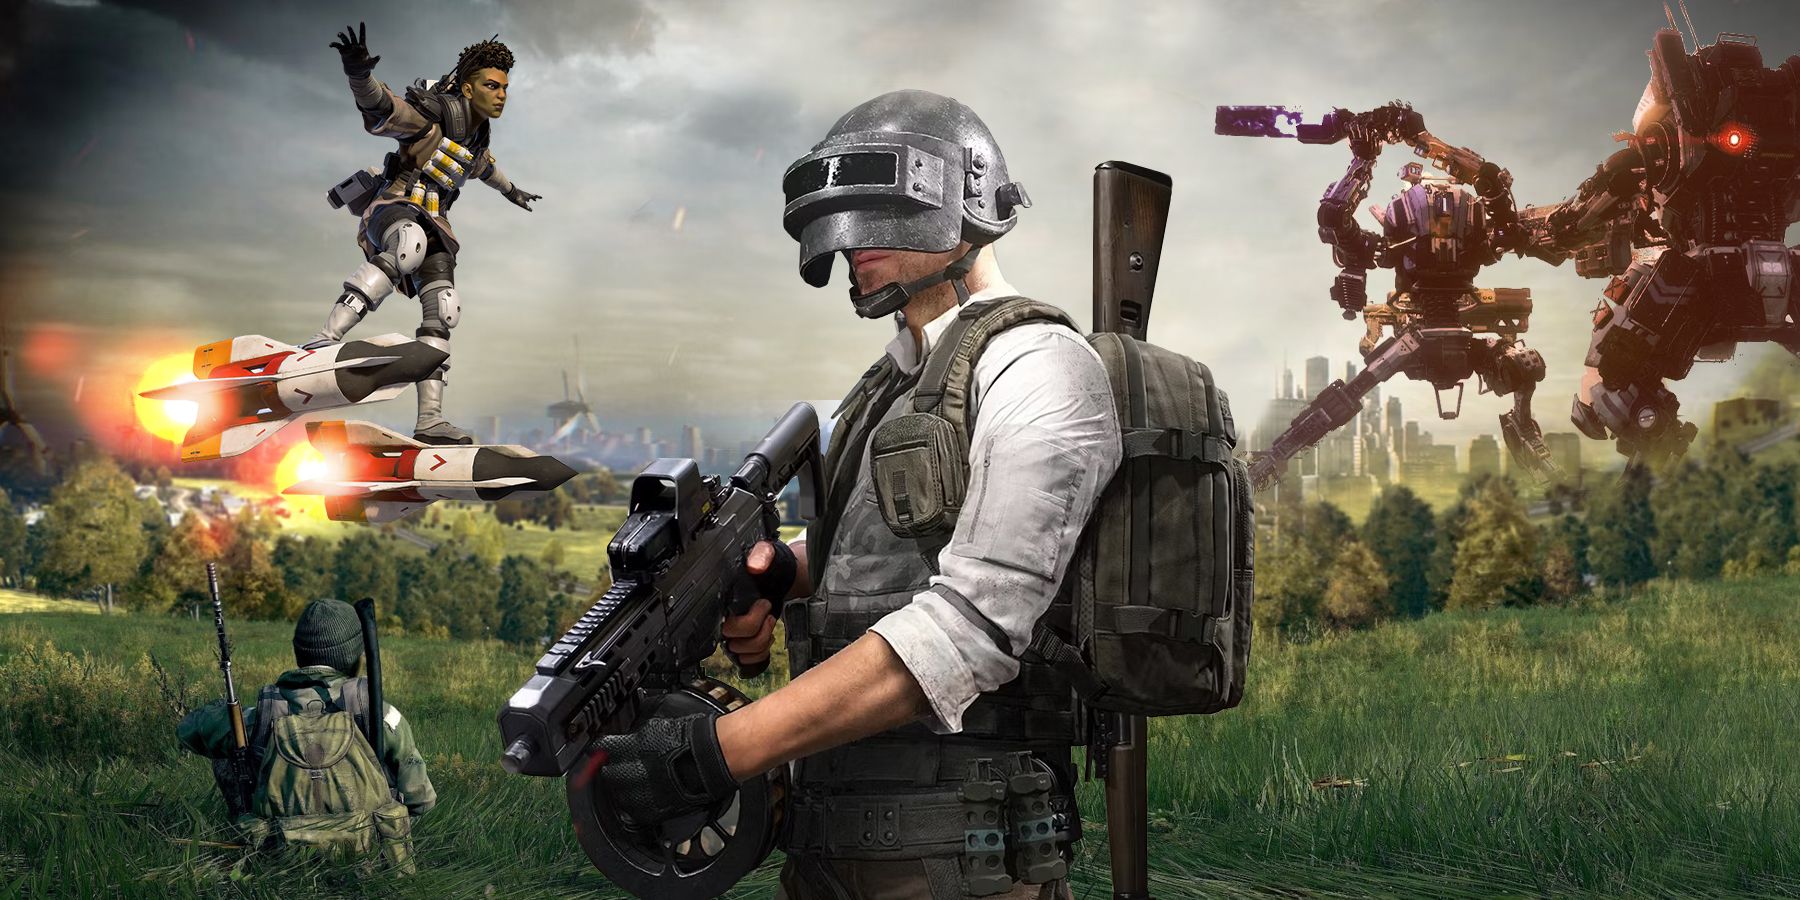 apex Legends, Titanfall, Dayz, Pubg Battlegrounds are among 24 Games To Play If You Love Counter-Strike